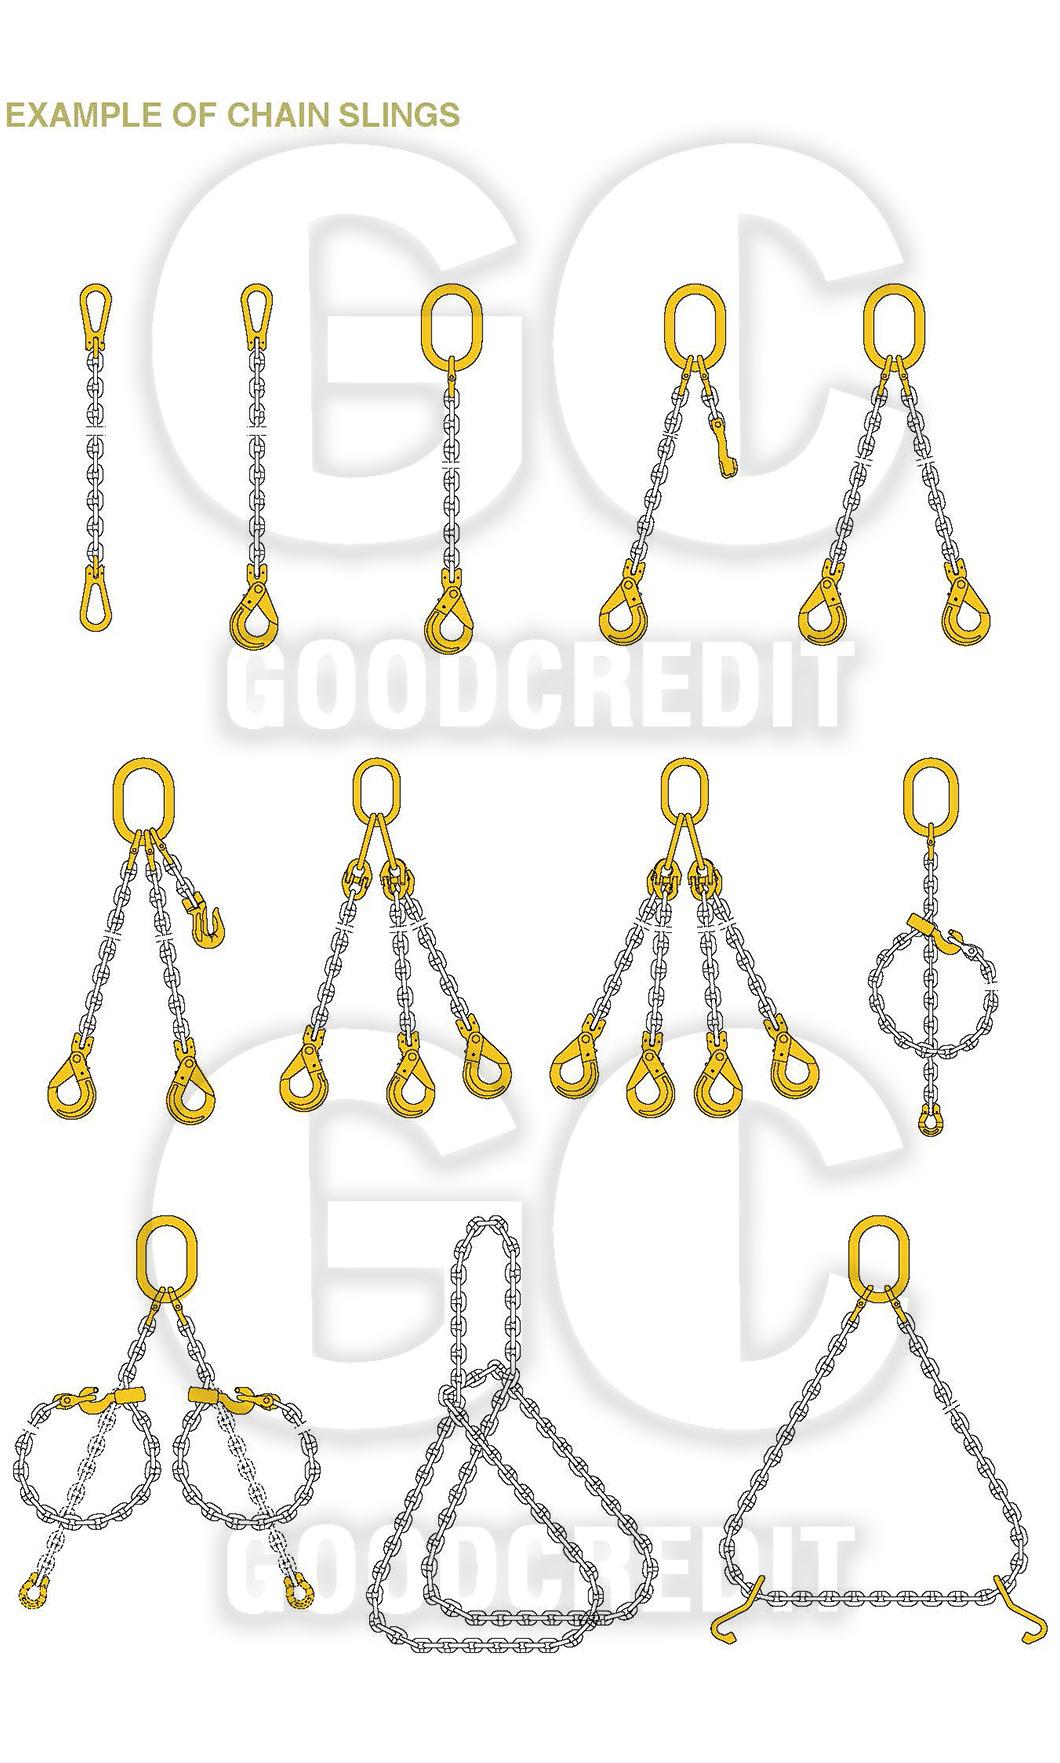 Factory Price Wholesale Best Selling English Standard Welded Short Long Link Chain